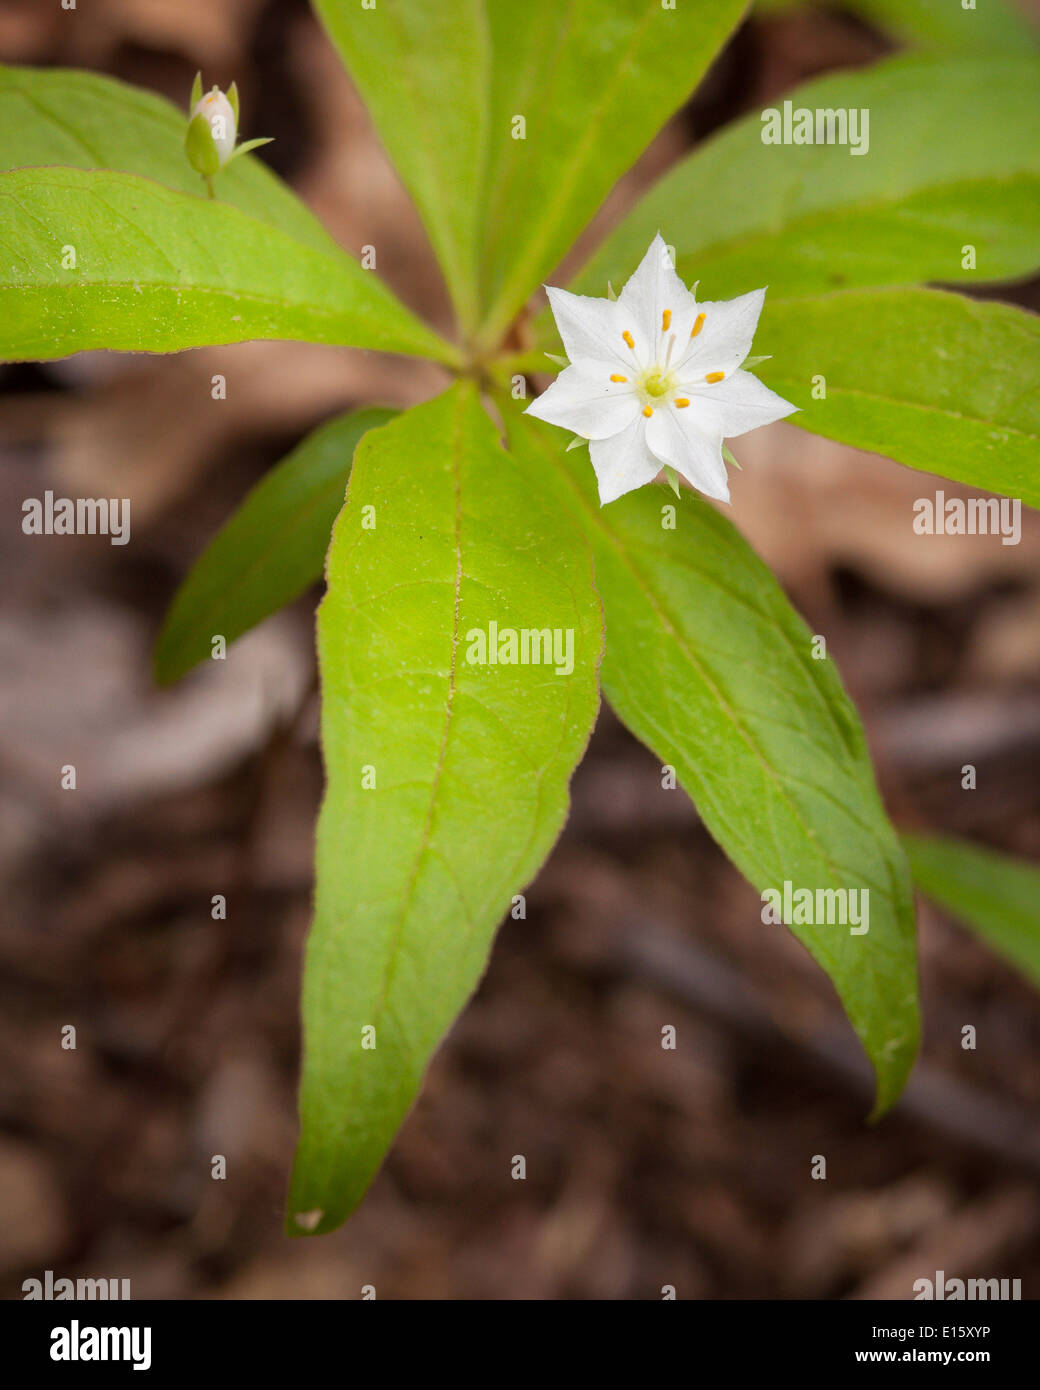 Blooming starflower (Trientalis borealis) showing leaves and flower. Stock Photo